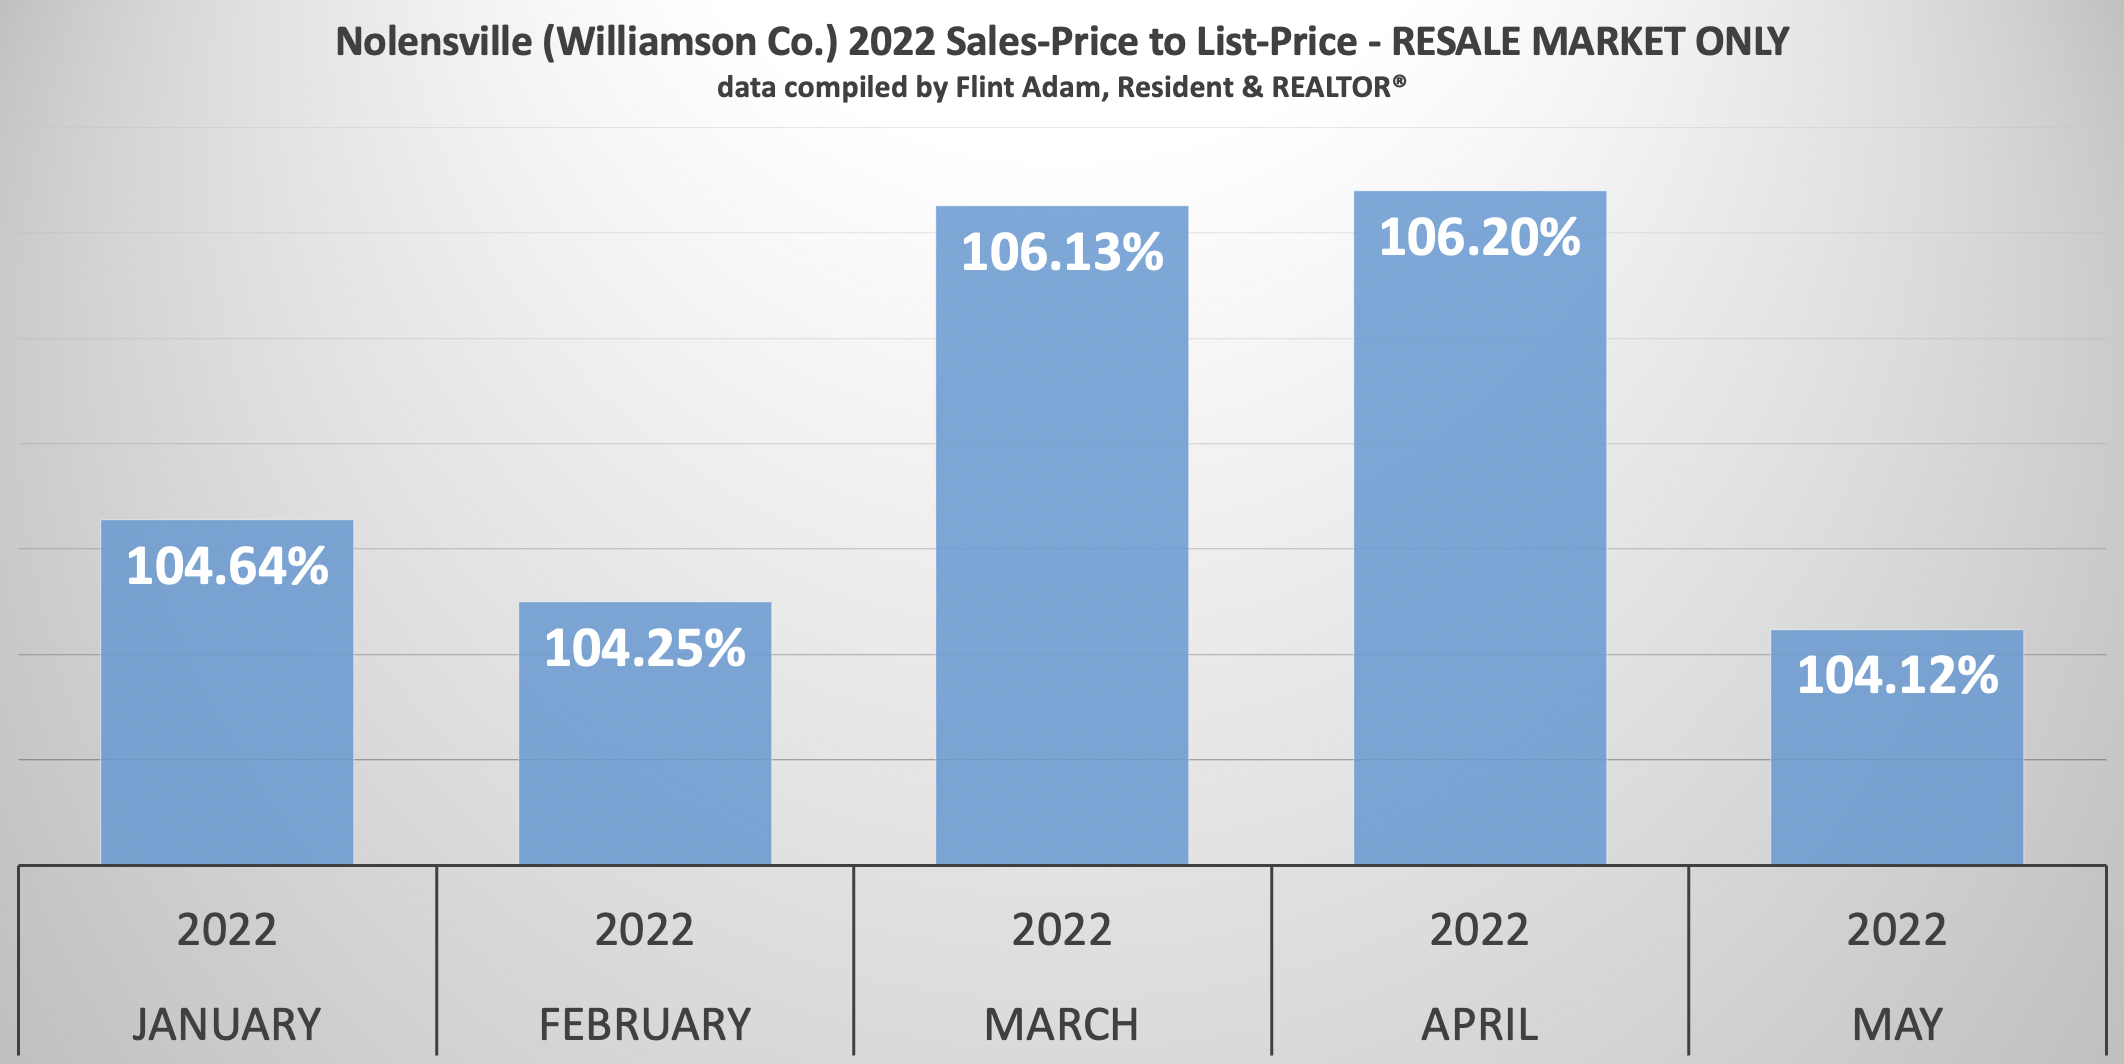 Nolensville TN (Williamson Co.) Sales Price to List Price Ratios for the Existing Homes Market - January through May 2022